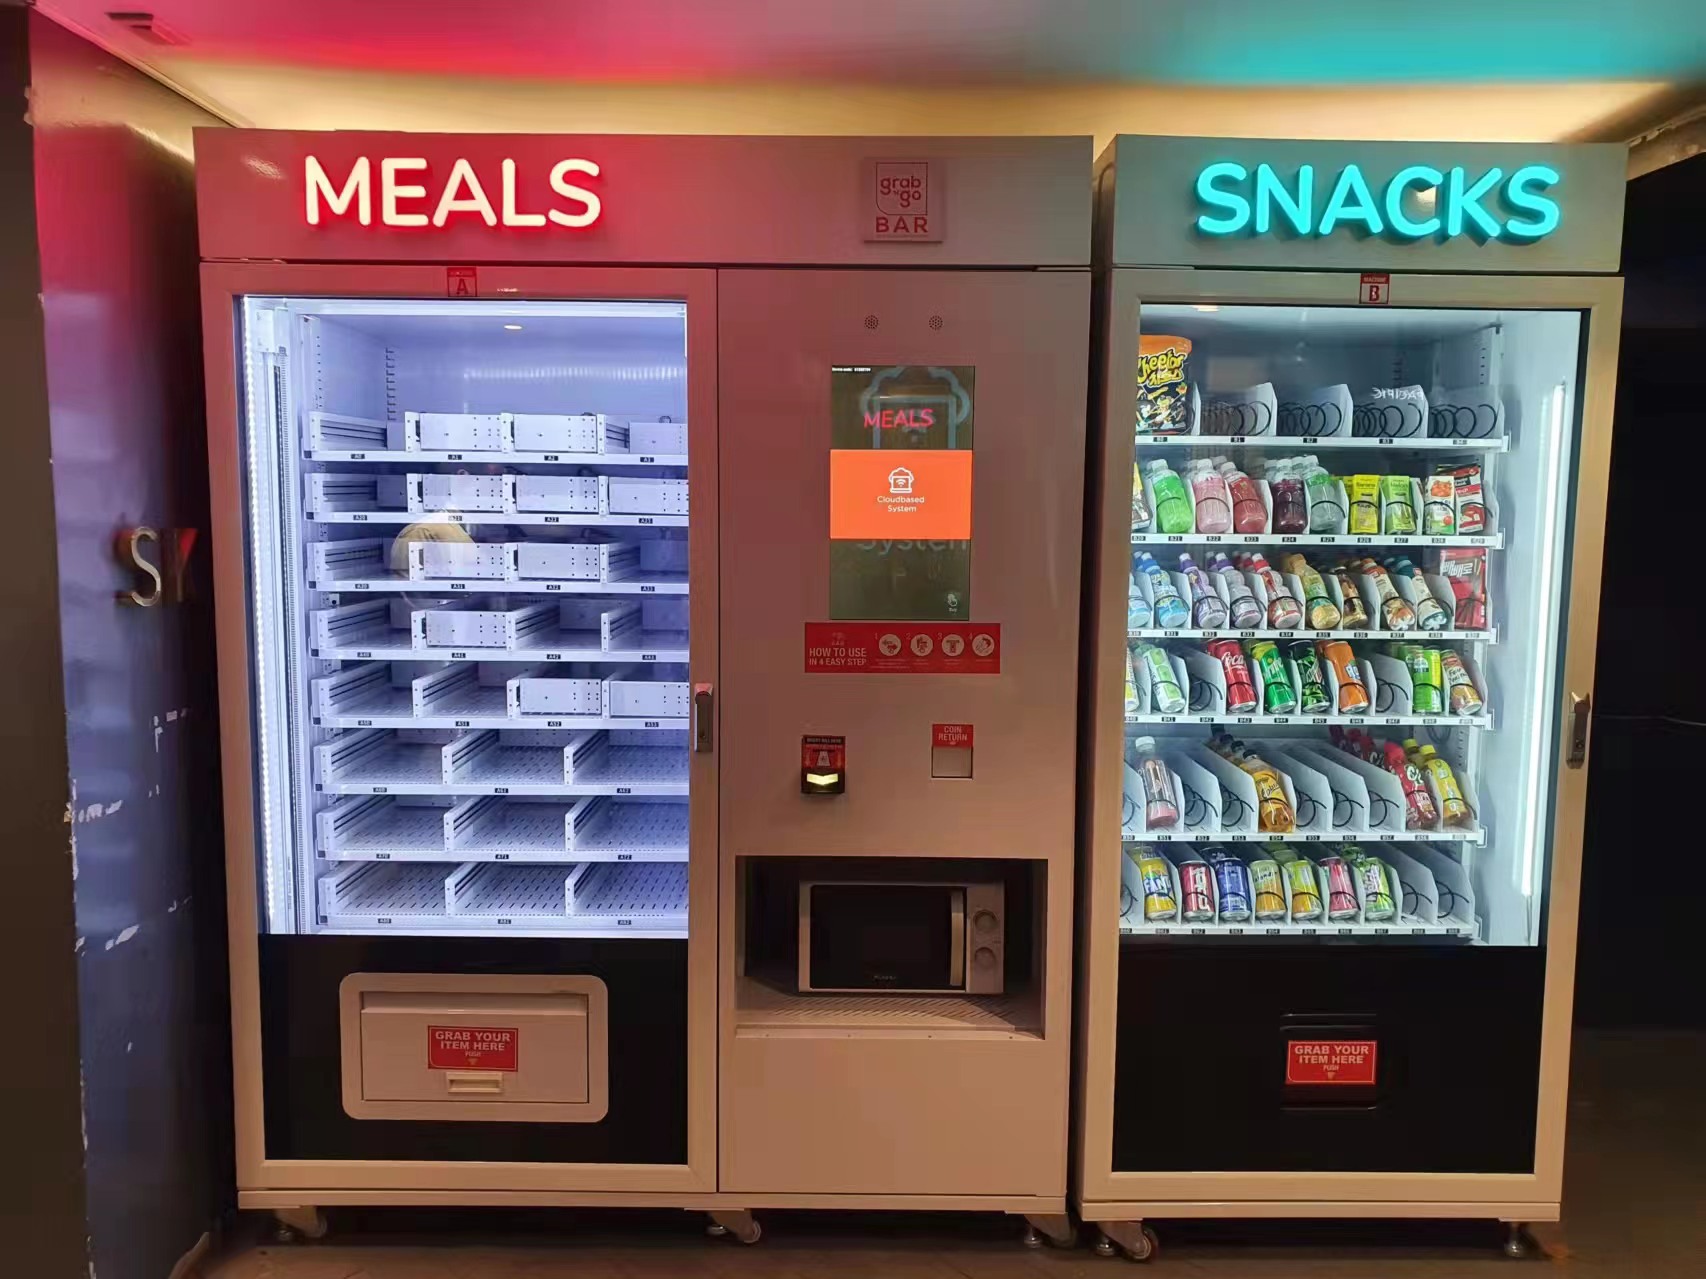 Micron smart vengding machine selling snacks and drinks in Philippines